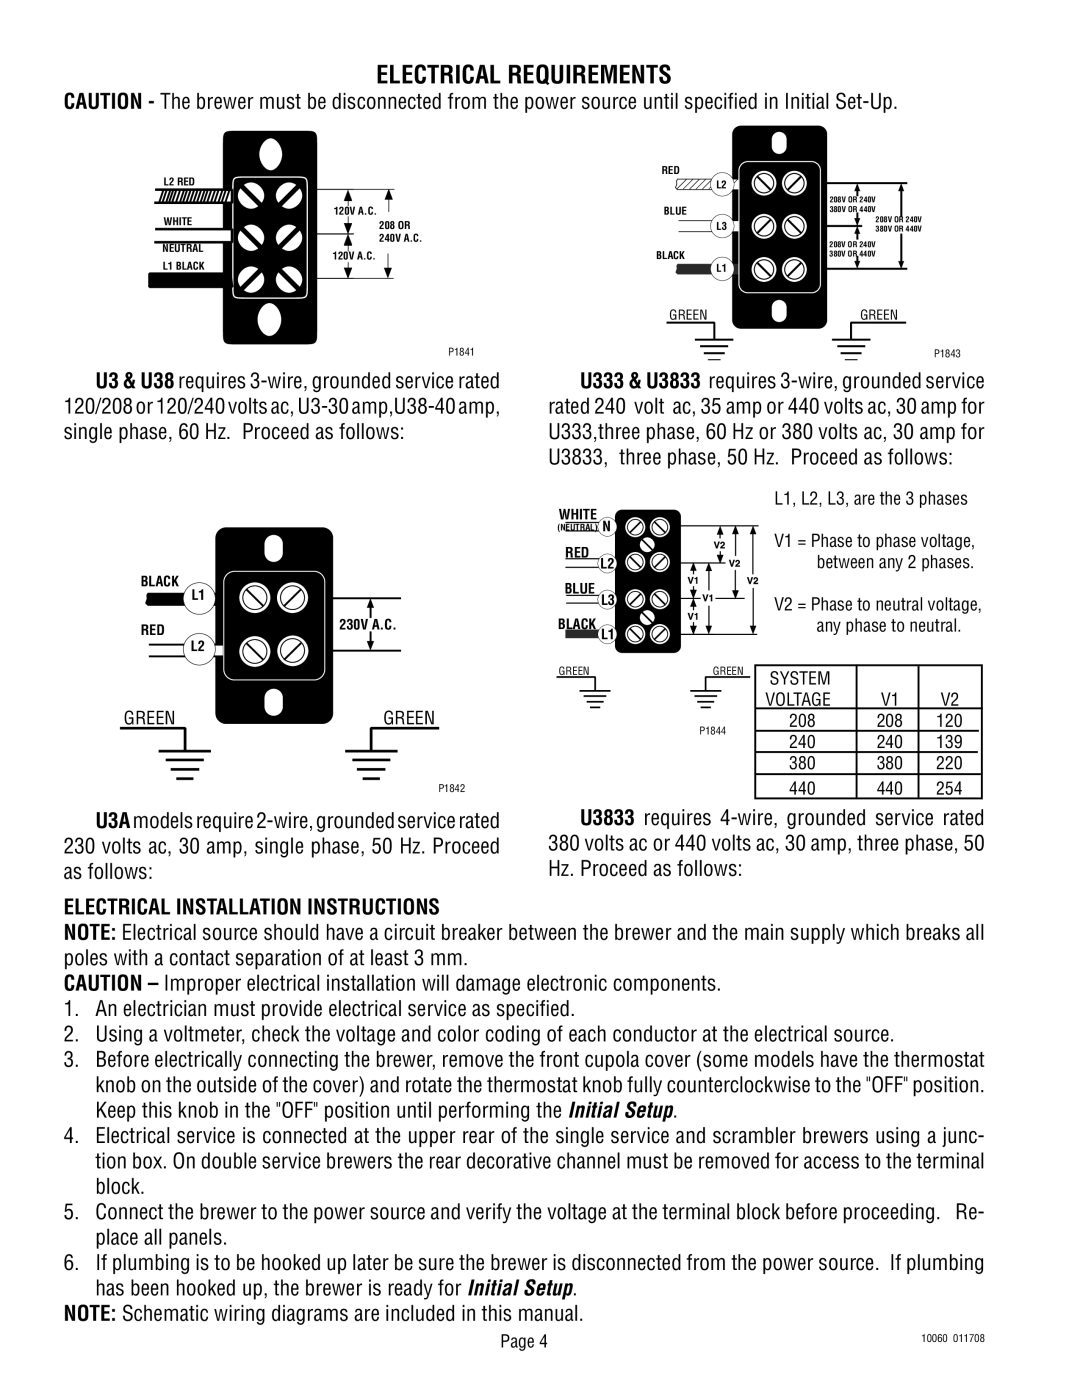 Bunn U3A service manual Electrical Requirements, Electrical Installation Instructions 